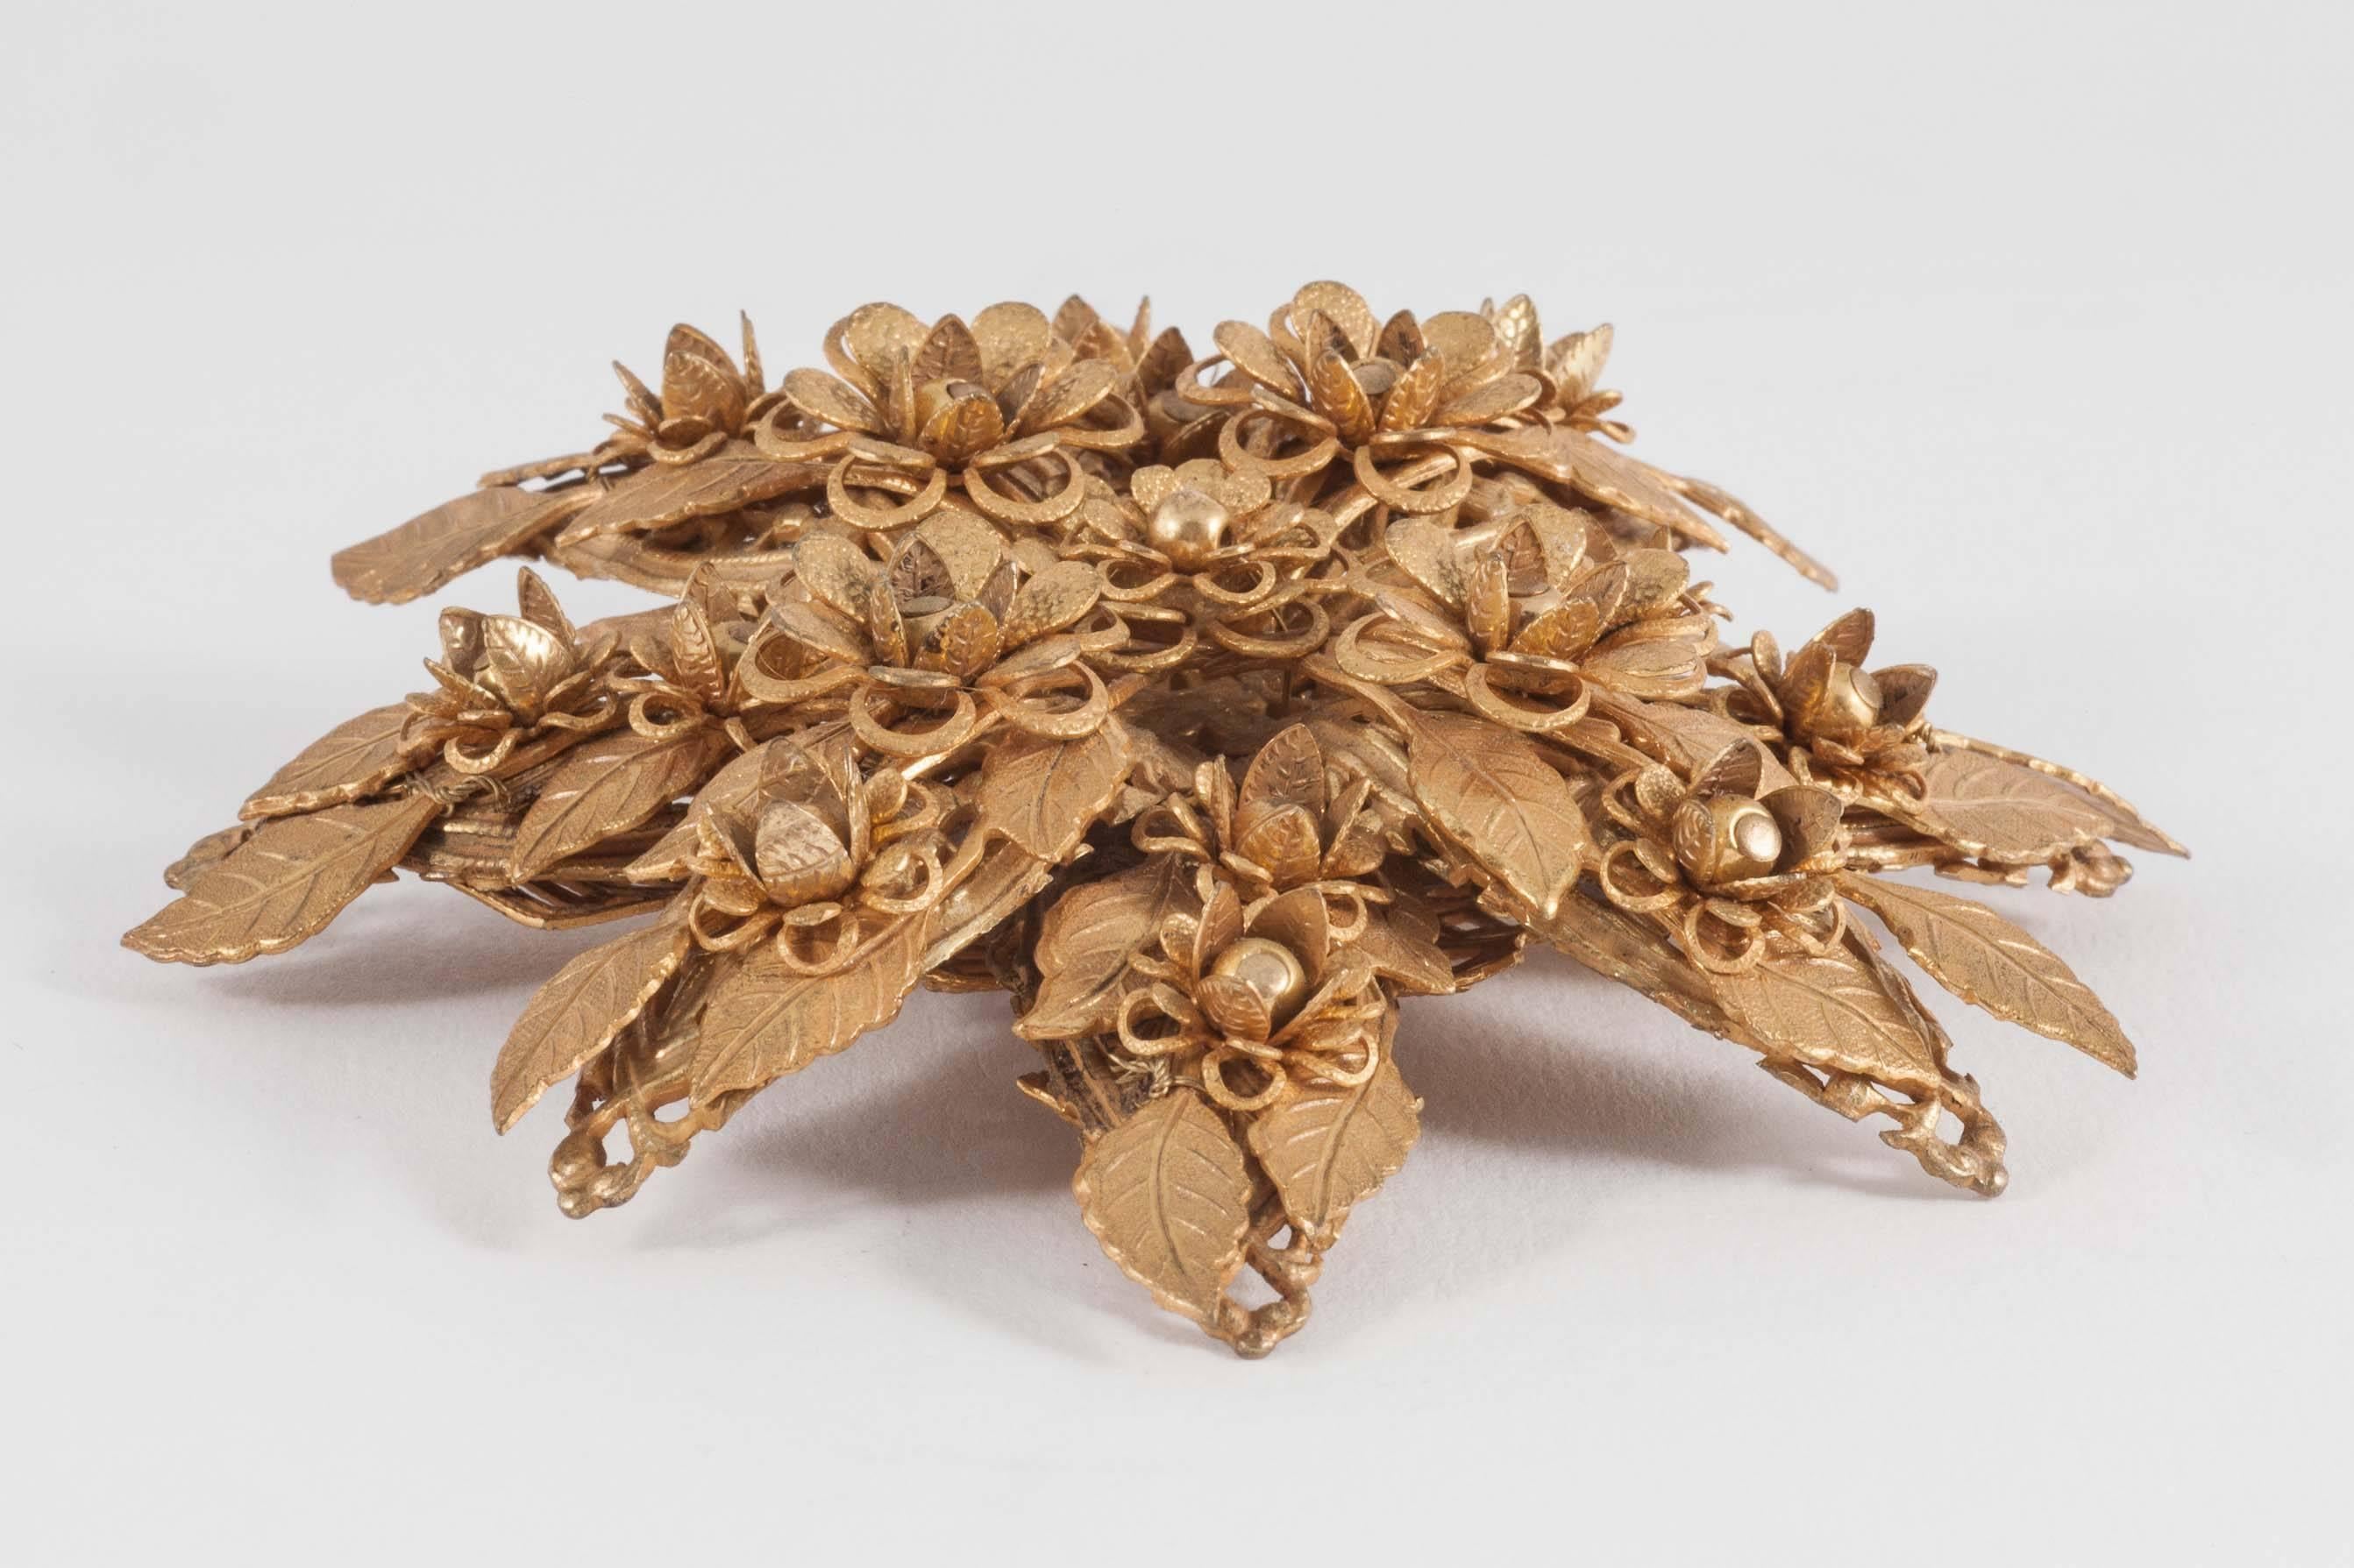 Women's Large gilt 'flower' brooch by De Mario/S. Hagler, with matching earrings, 1960s